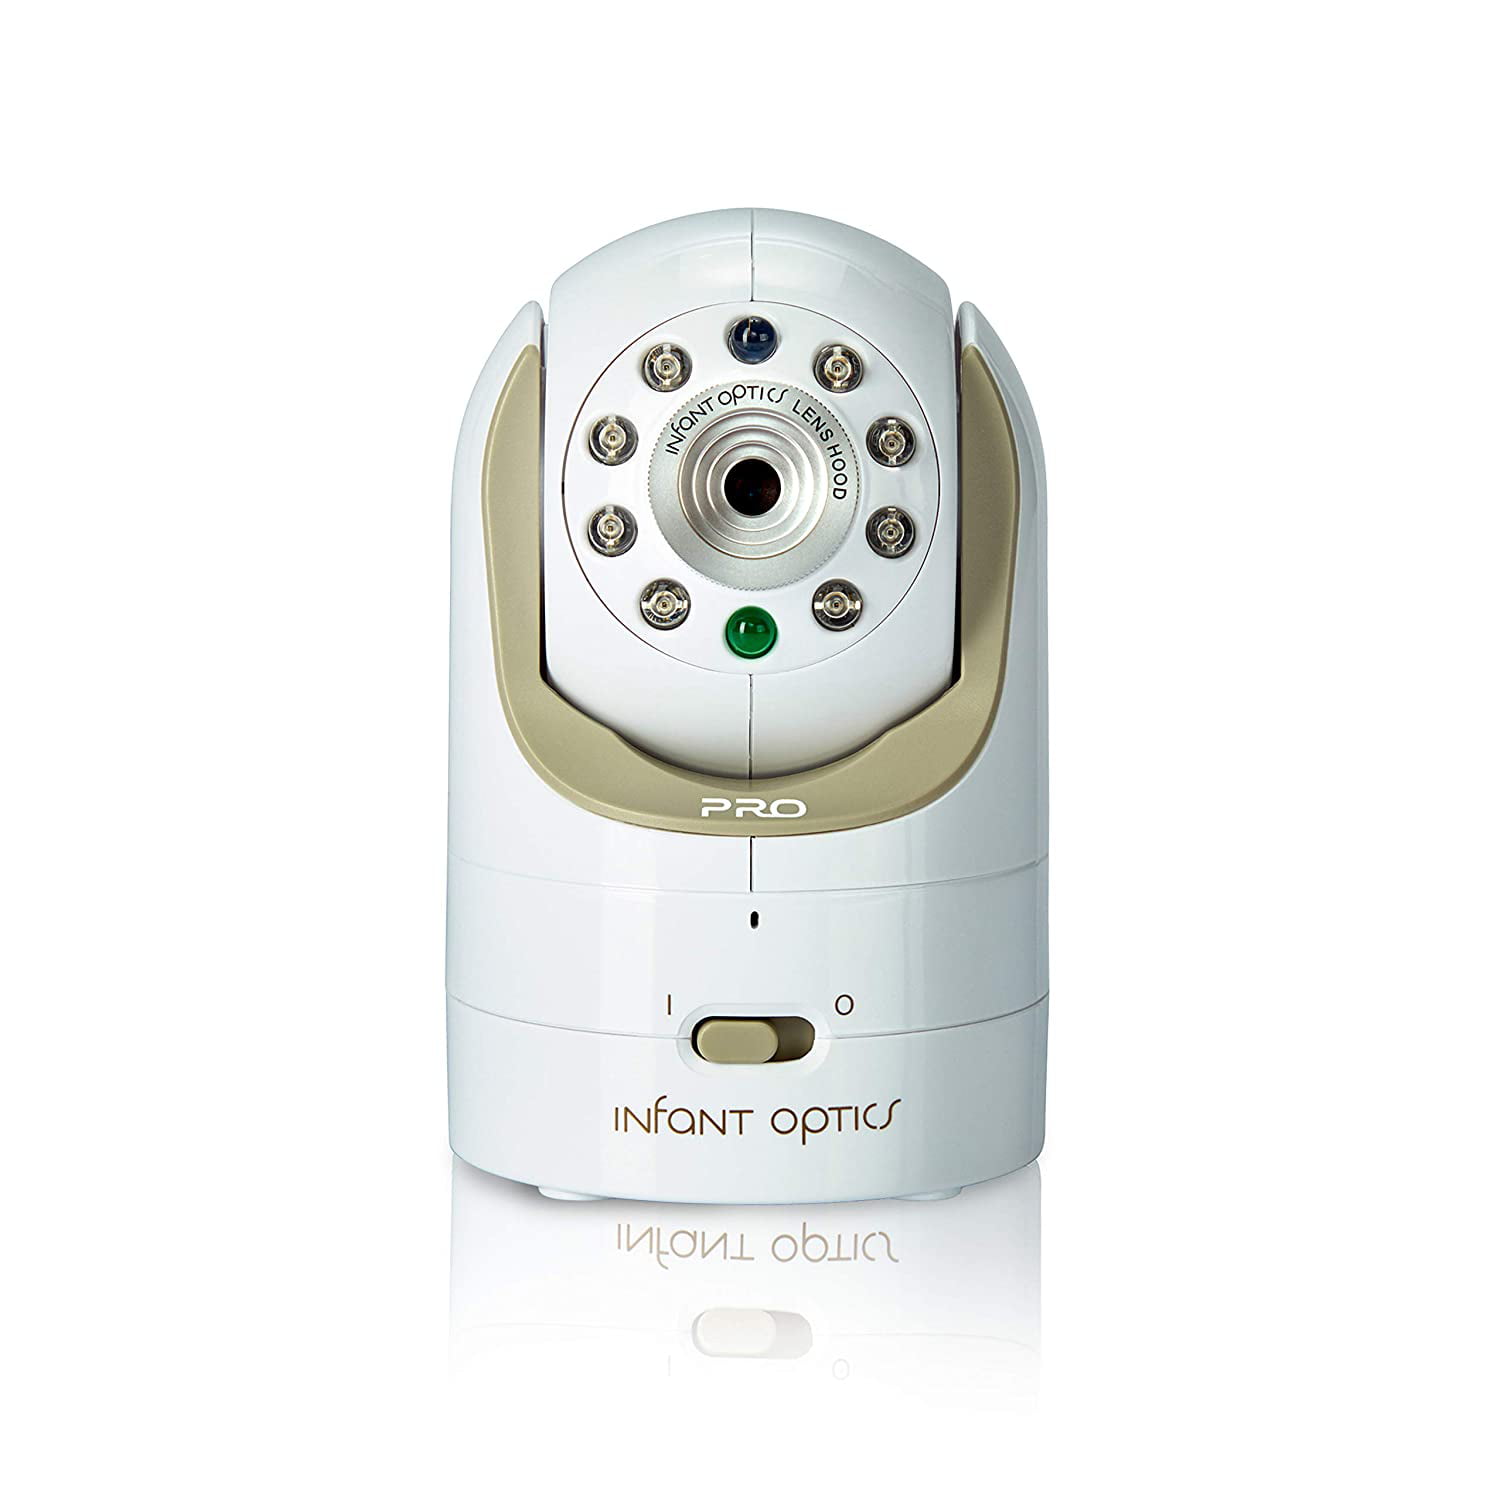 Infant Optics DXR-8 PRO Add-on Camera (Not Compatible with DXR-8), White